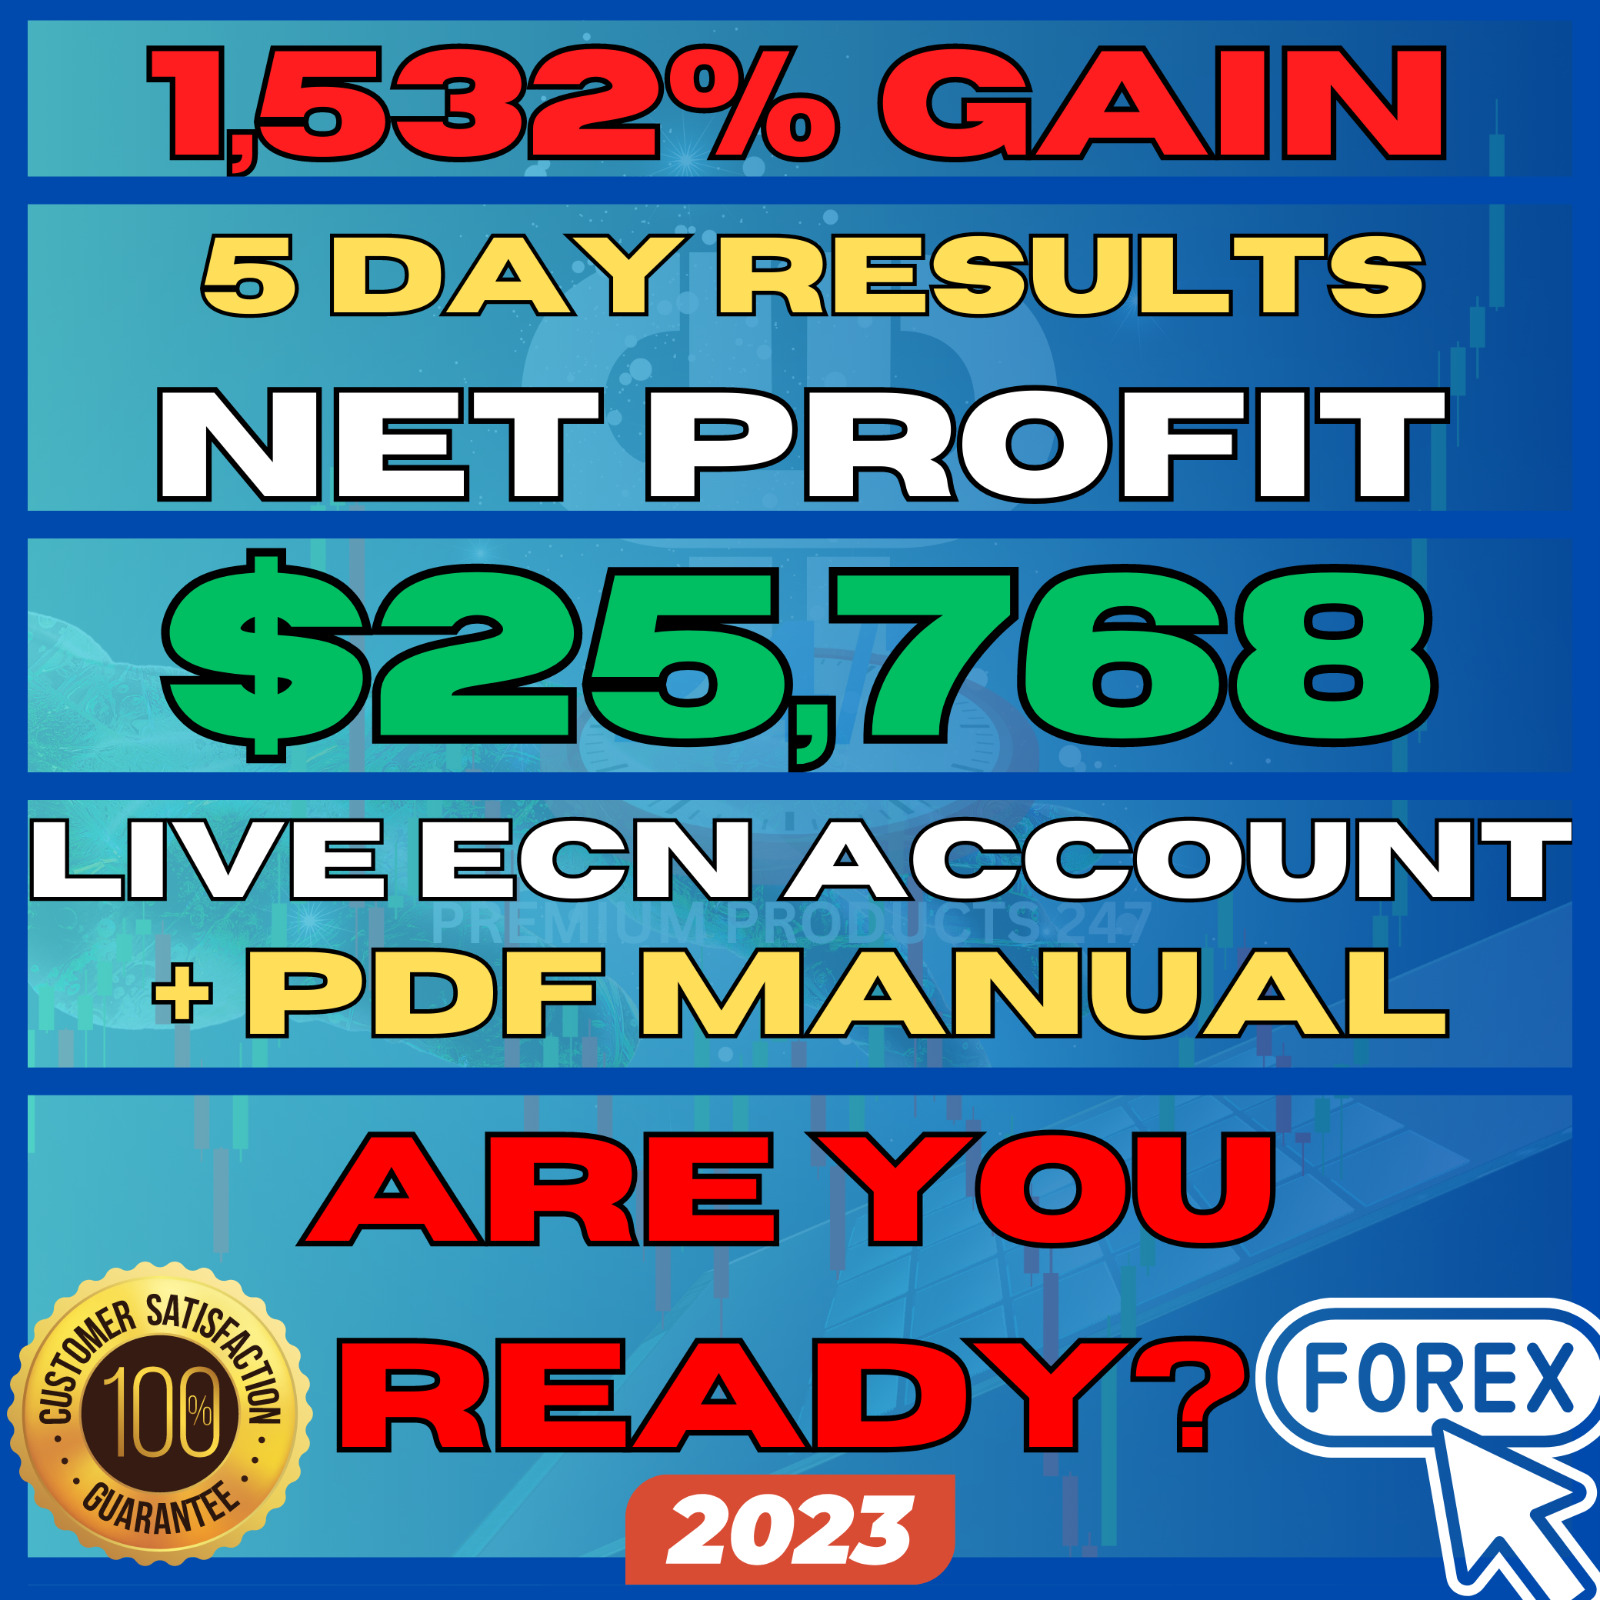 The Ultimate Trading Tool - Fully Automated MT4 EA Unstoppable Forex BOT